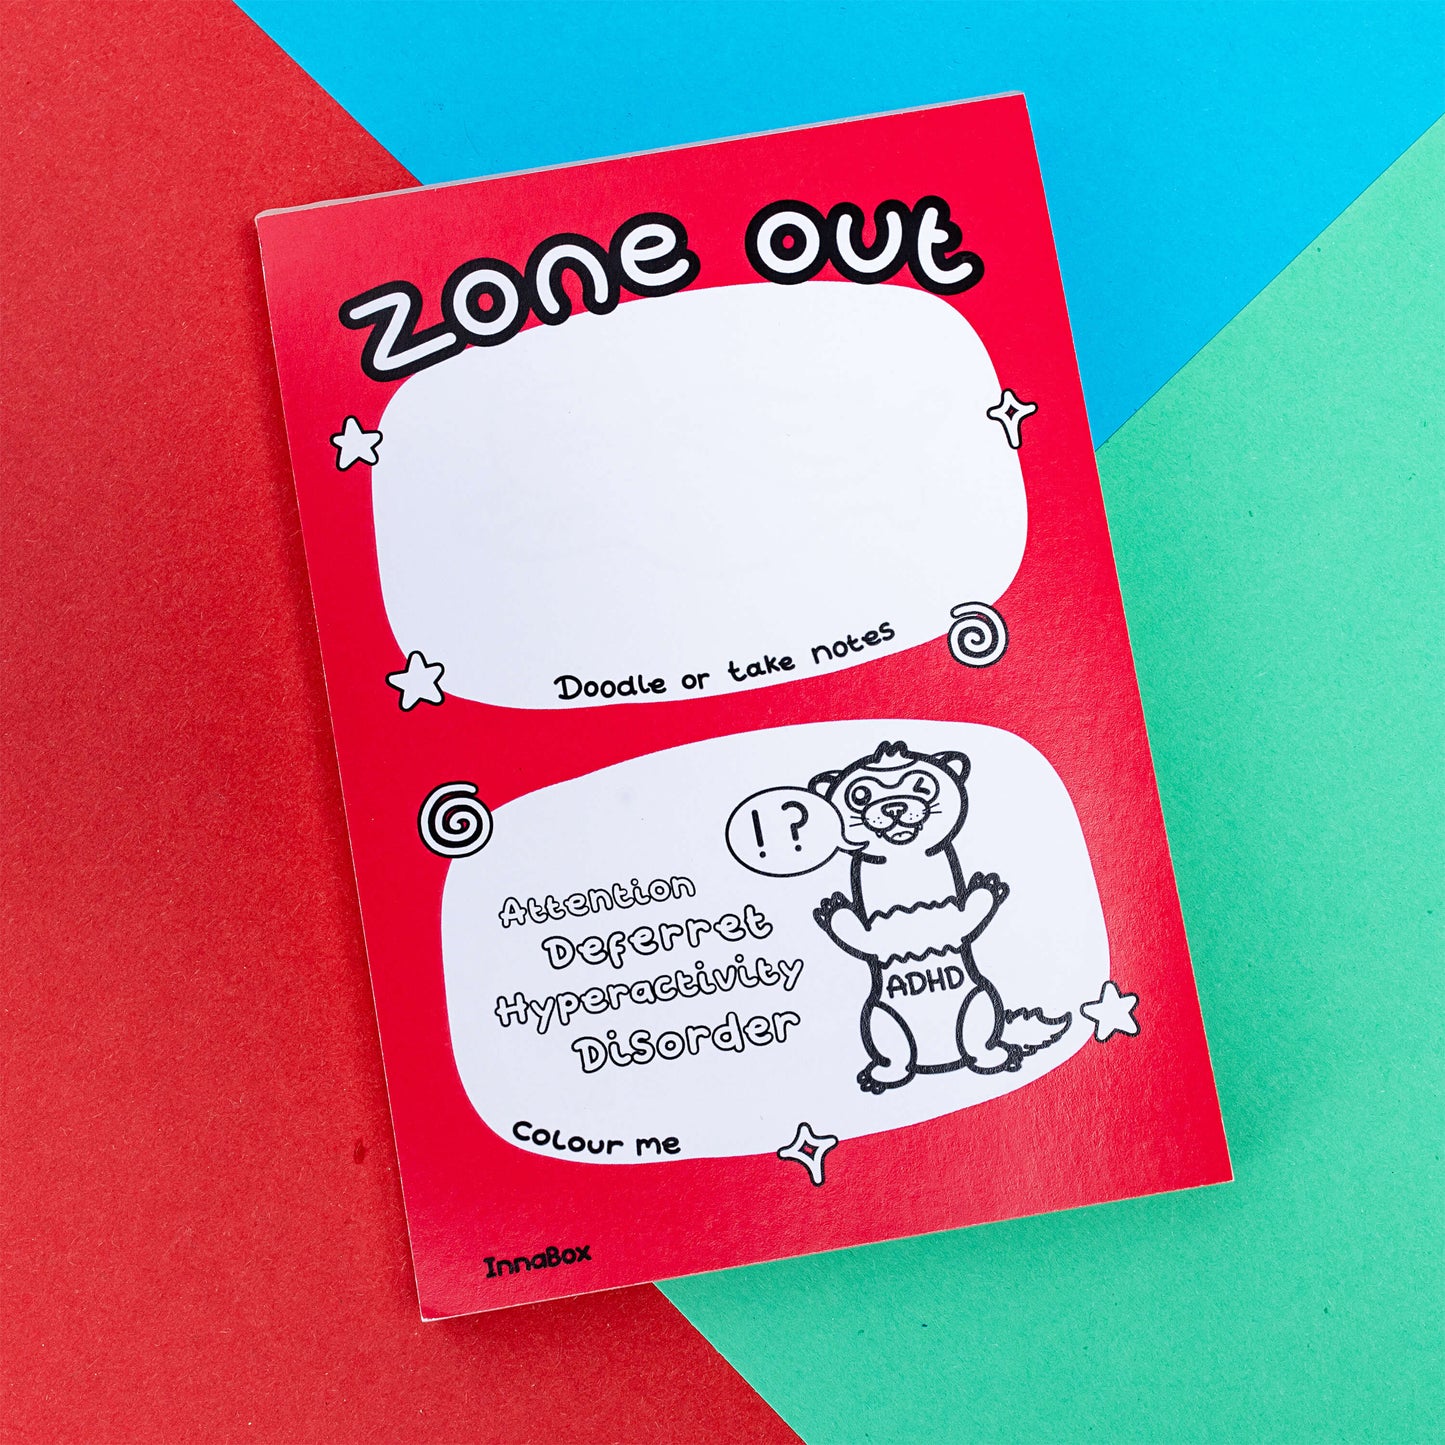 A zone out notebook with a ferret with ADHD written on its tummy and the words 'Zone out' on the top it is on a blue, green and red background. A hand drawn design to raise awareness for neurodiversity, adhd, autism.